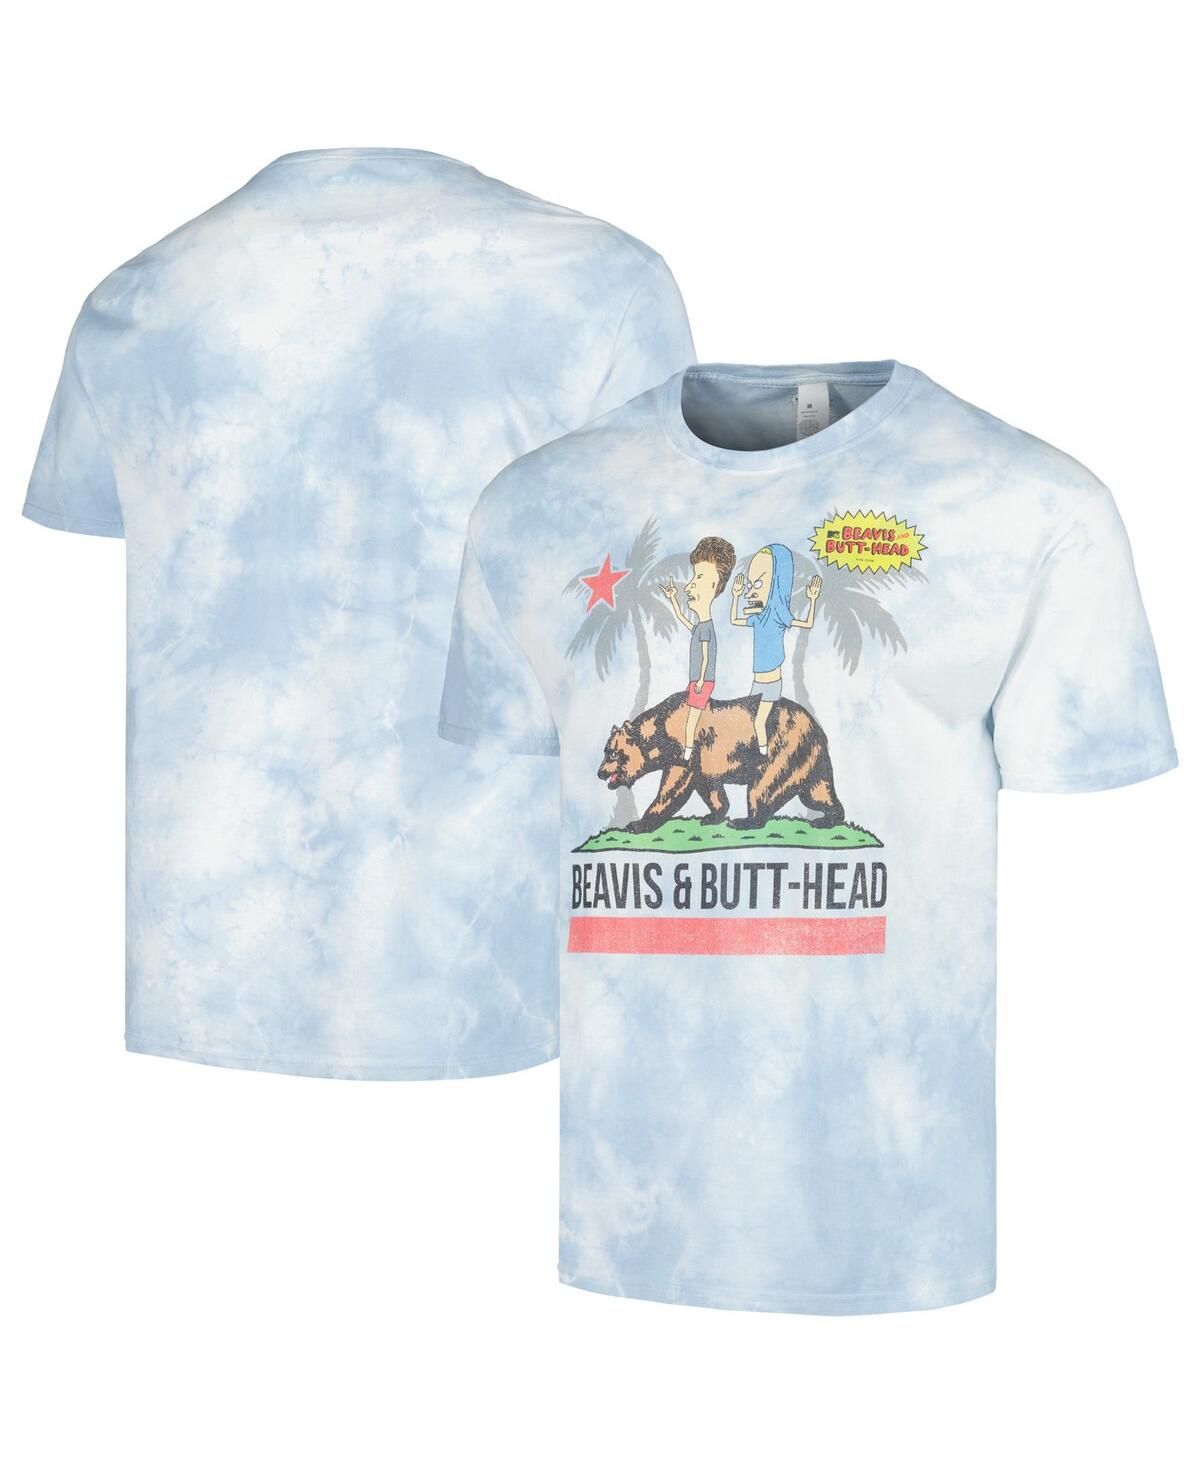 Men's and Women's Mad Engine White Beavis and Butt-Head Riding Cali Bear Graphic T-shirt - White